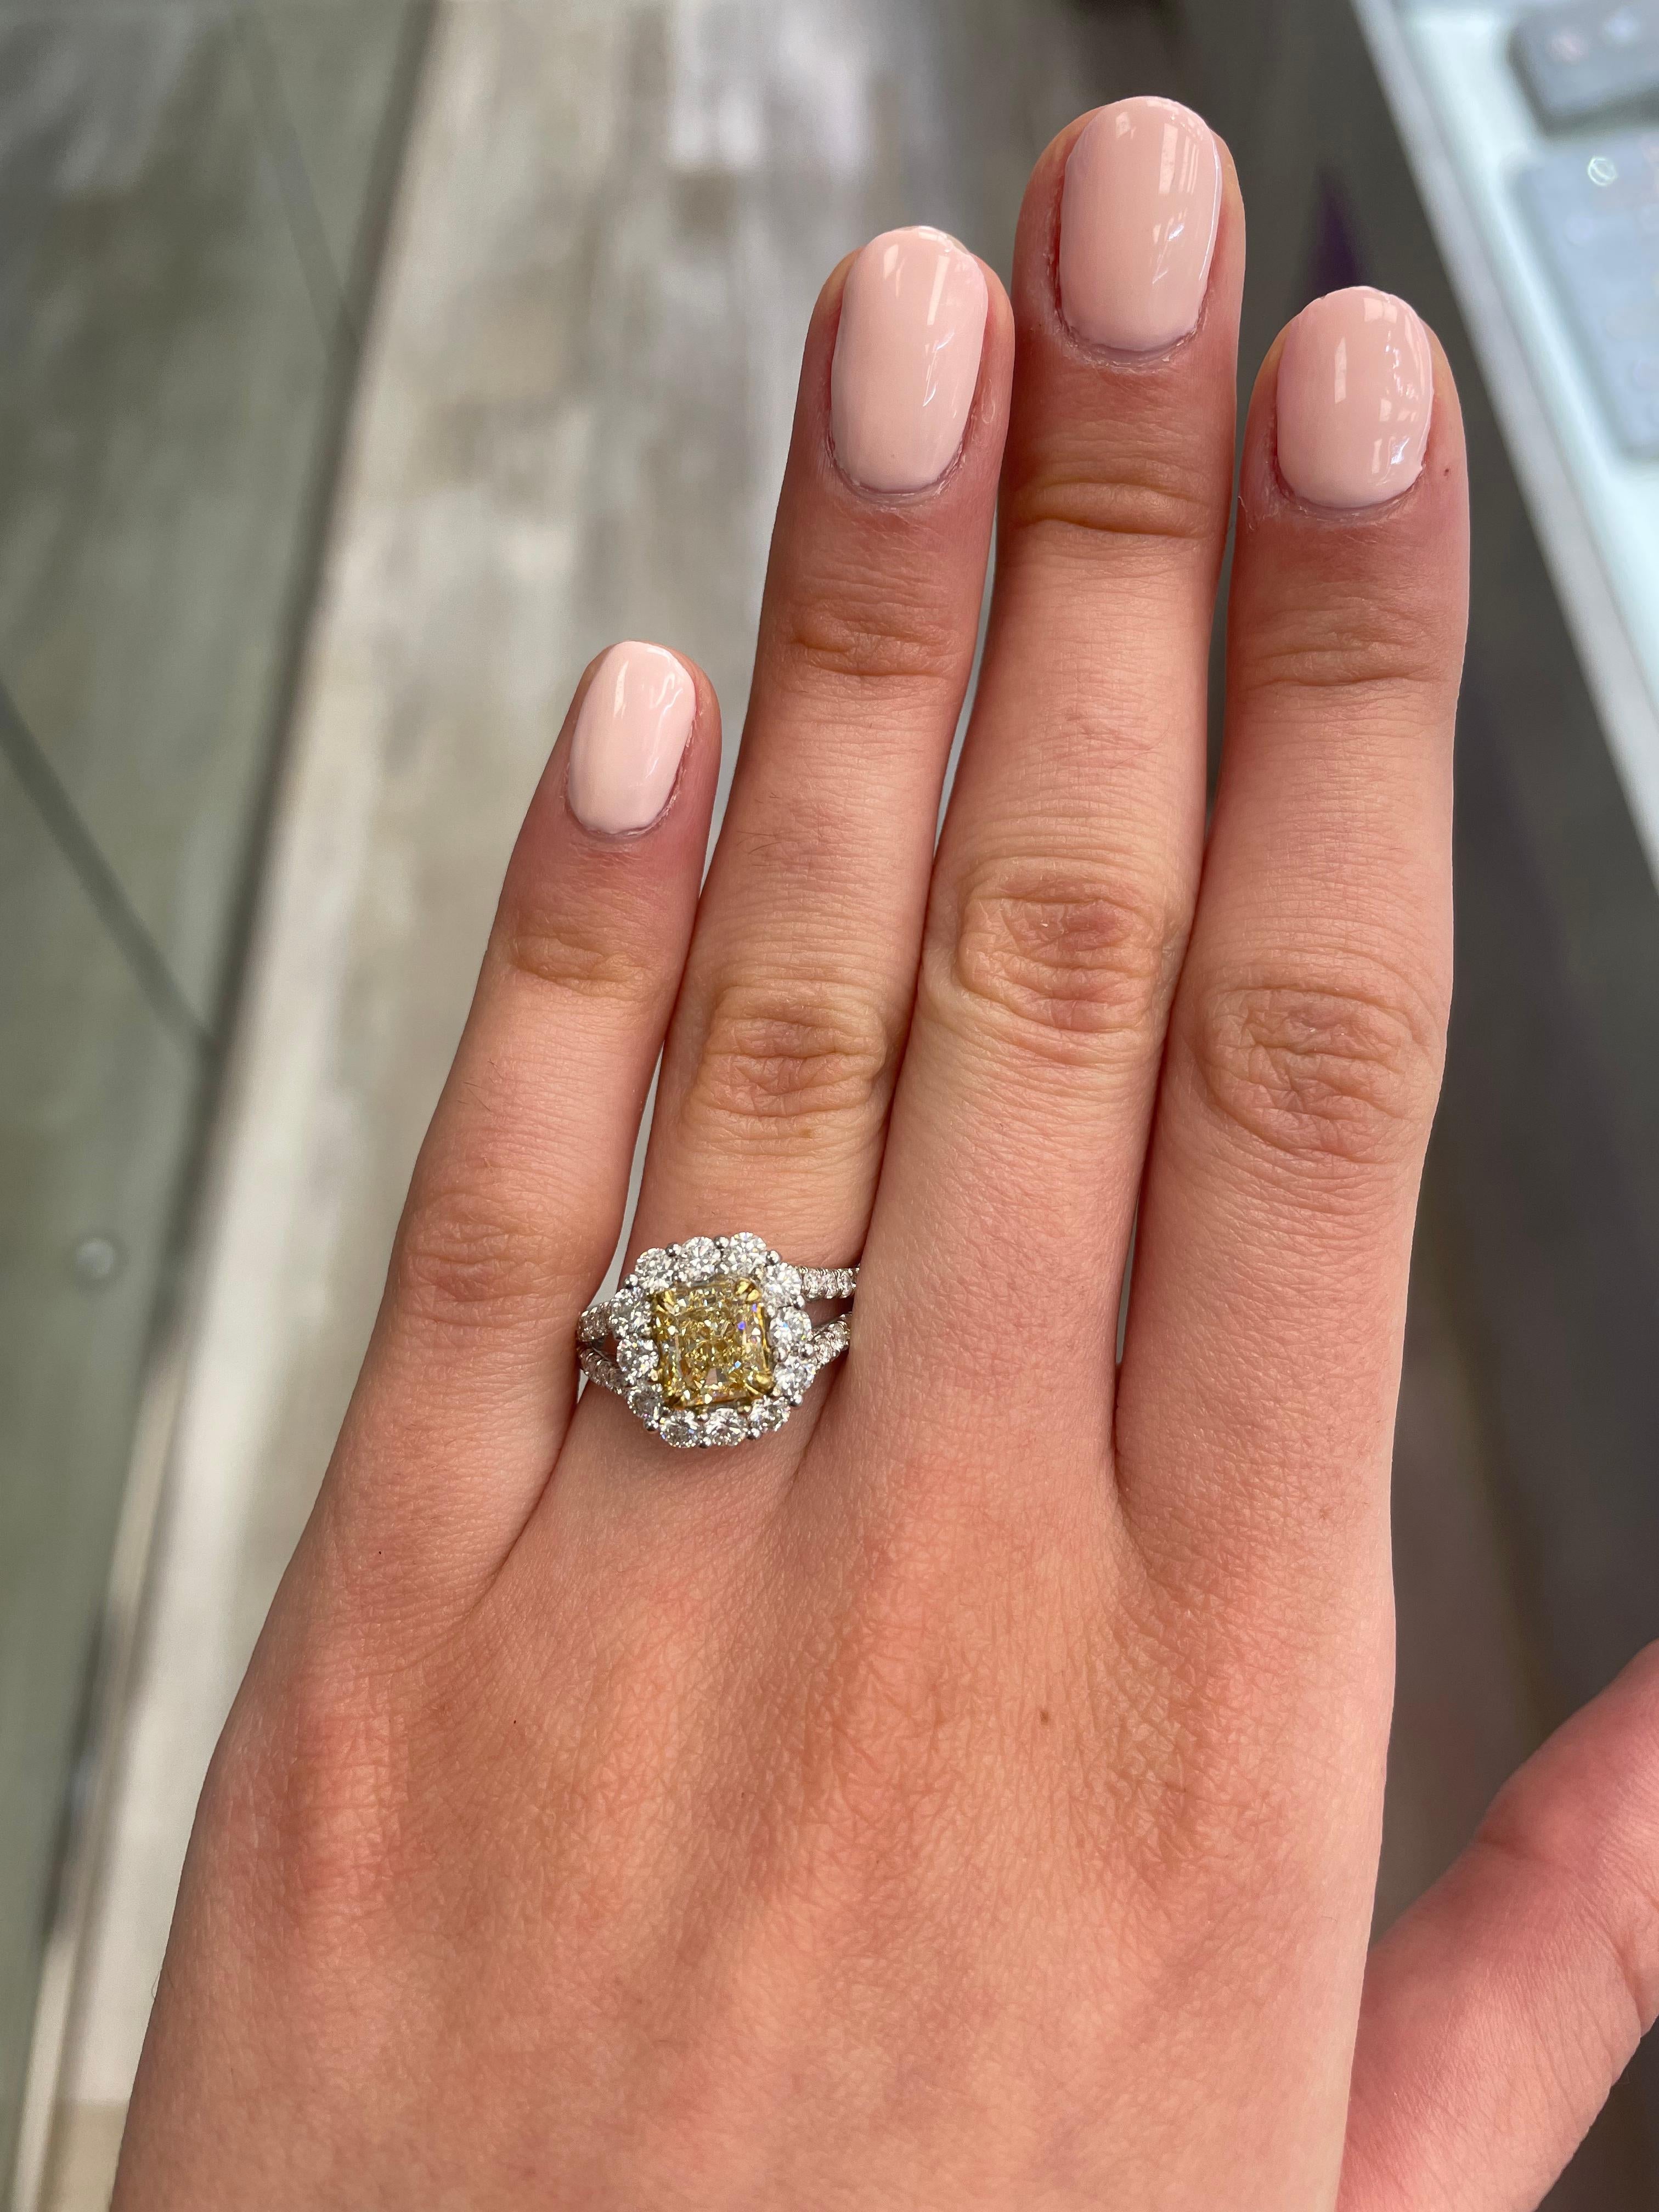 Stunning modern EGL certified yellow diamond with halo ring, two-tone 18k yellow and white gold, split shank. By Alexander Beverly Hills
2.77 carats total diamond weight.
1.52 carat radiant cut Fancy Intense Yellow color and VS2 clarity diamond, EGL